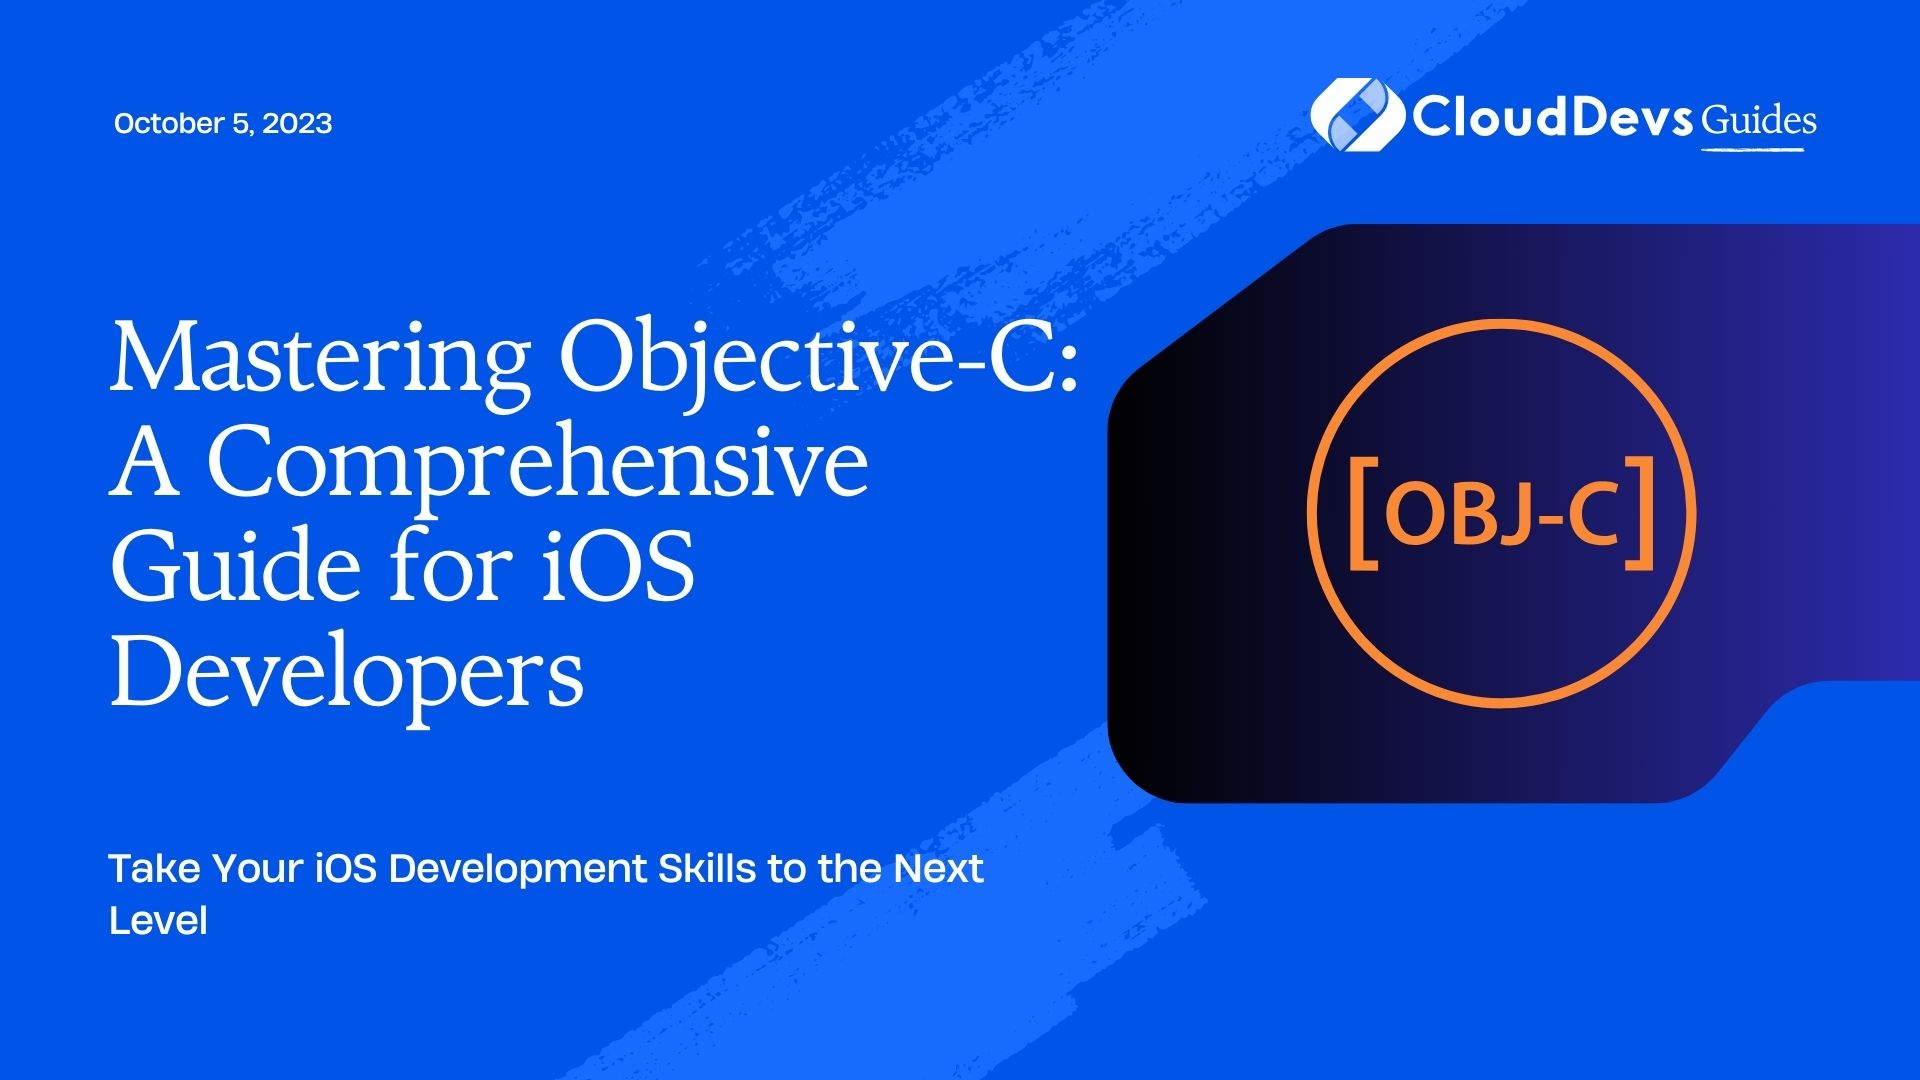 Mastering Objective-C: A Comprehensive Guide for iOS Developers